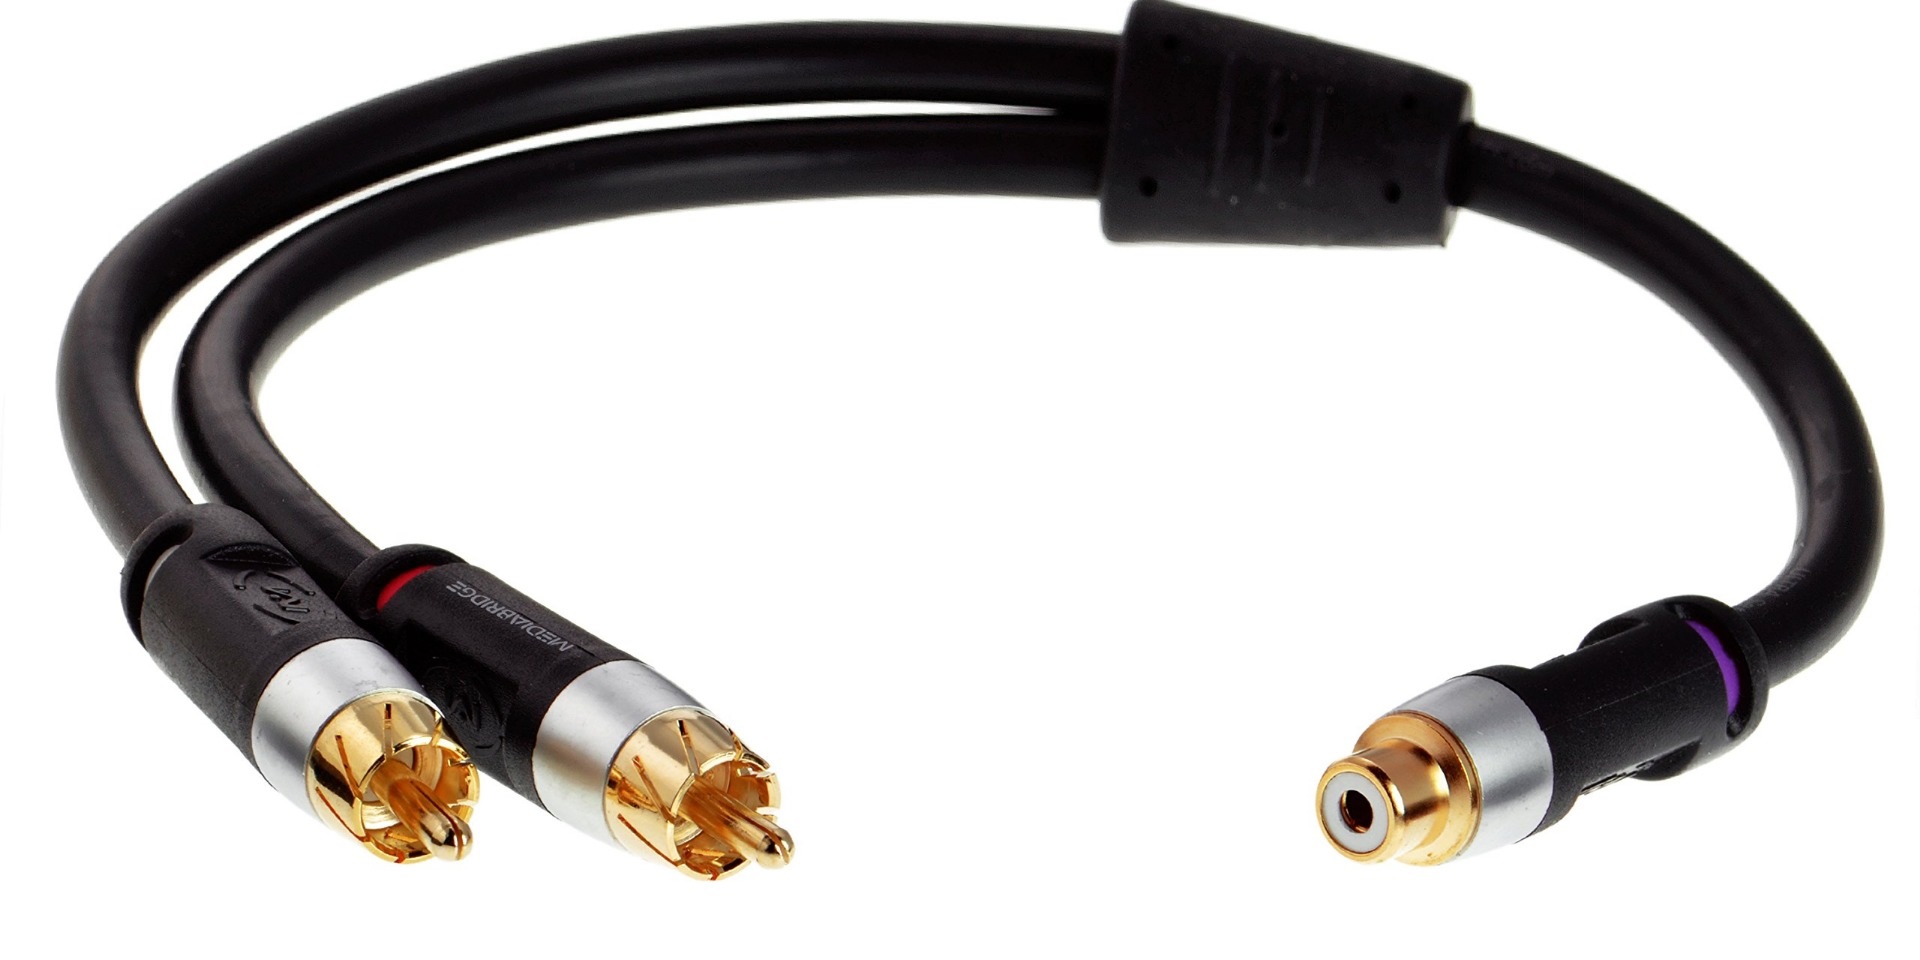 Audio cable adapter